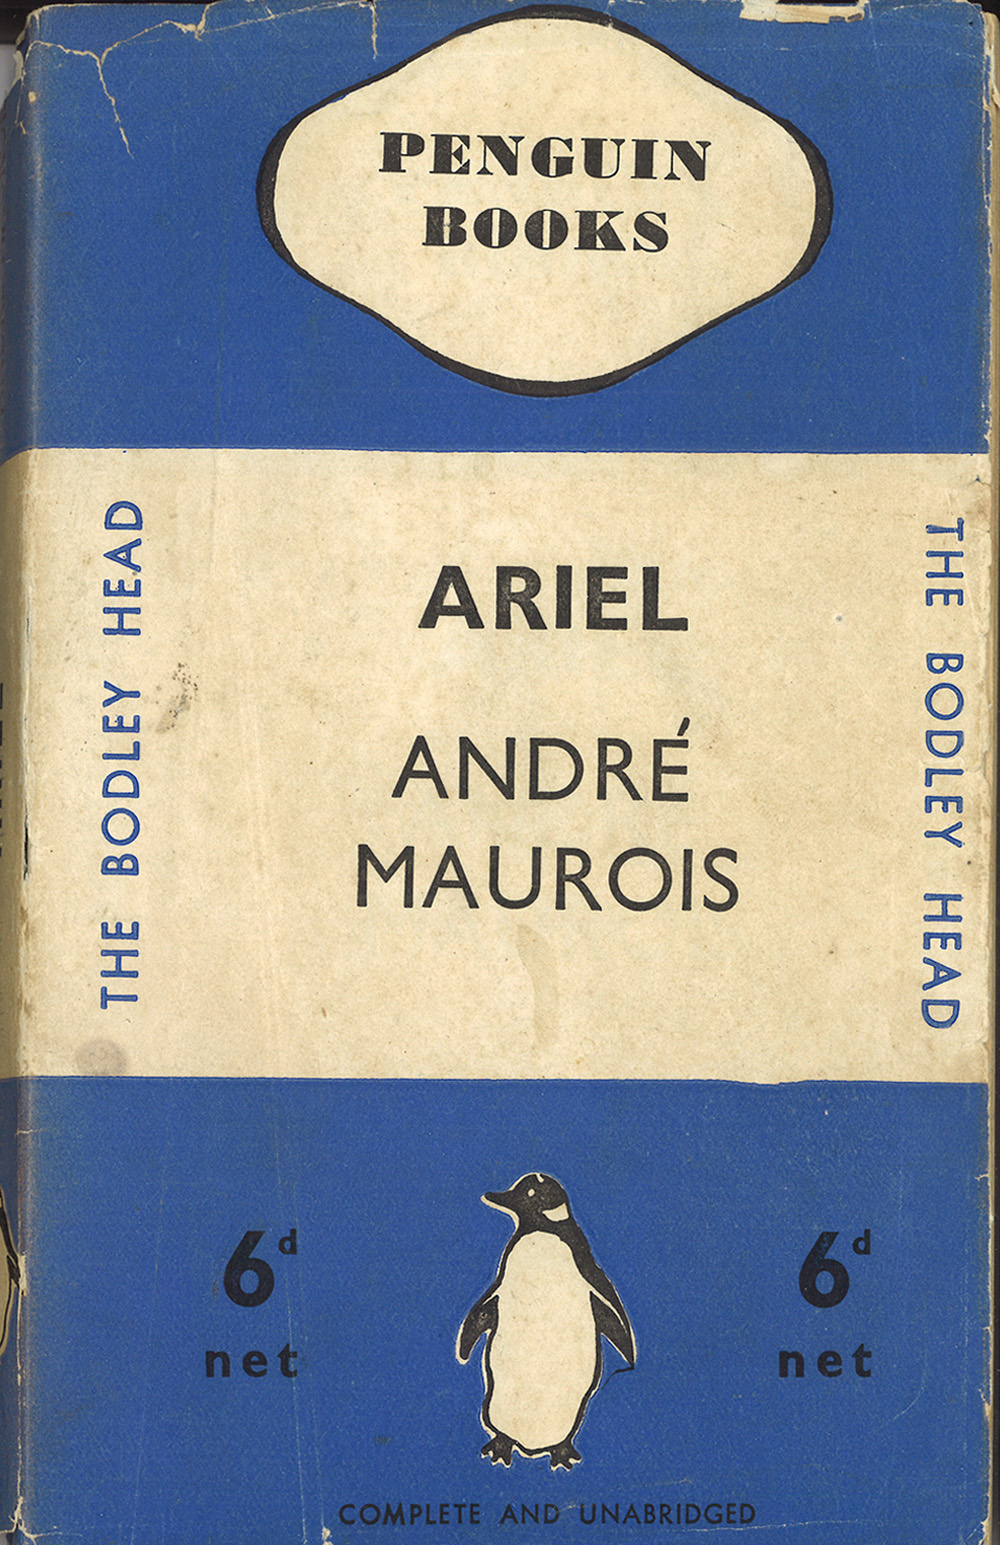 The first Penguin book, Ariel by Andre Maurois